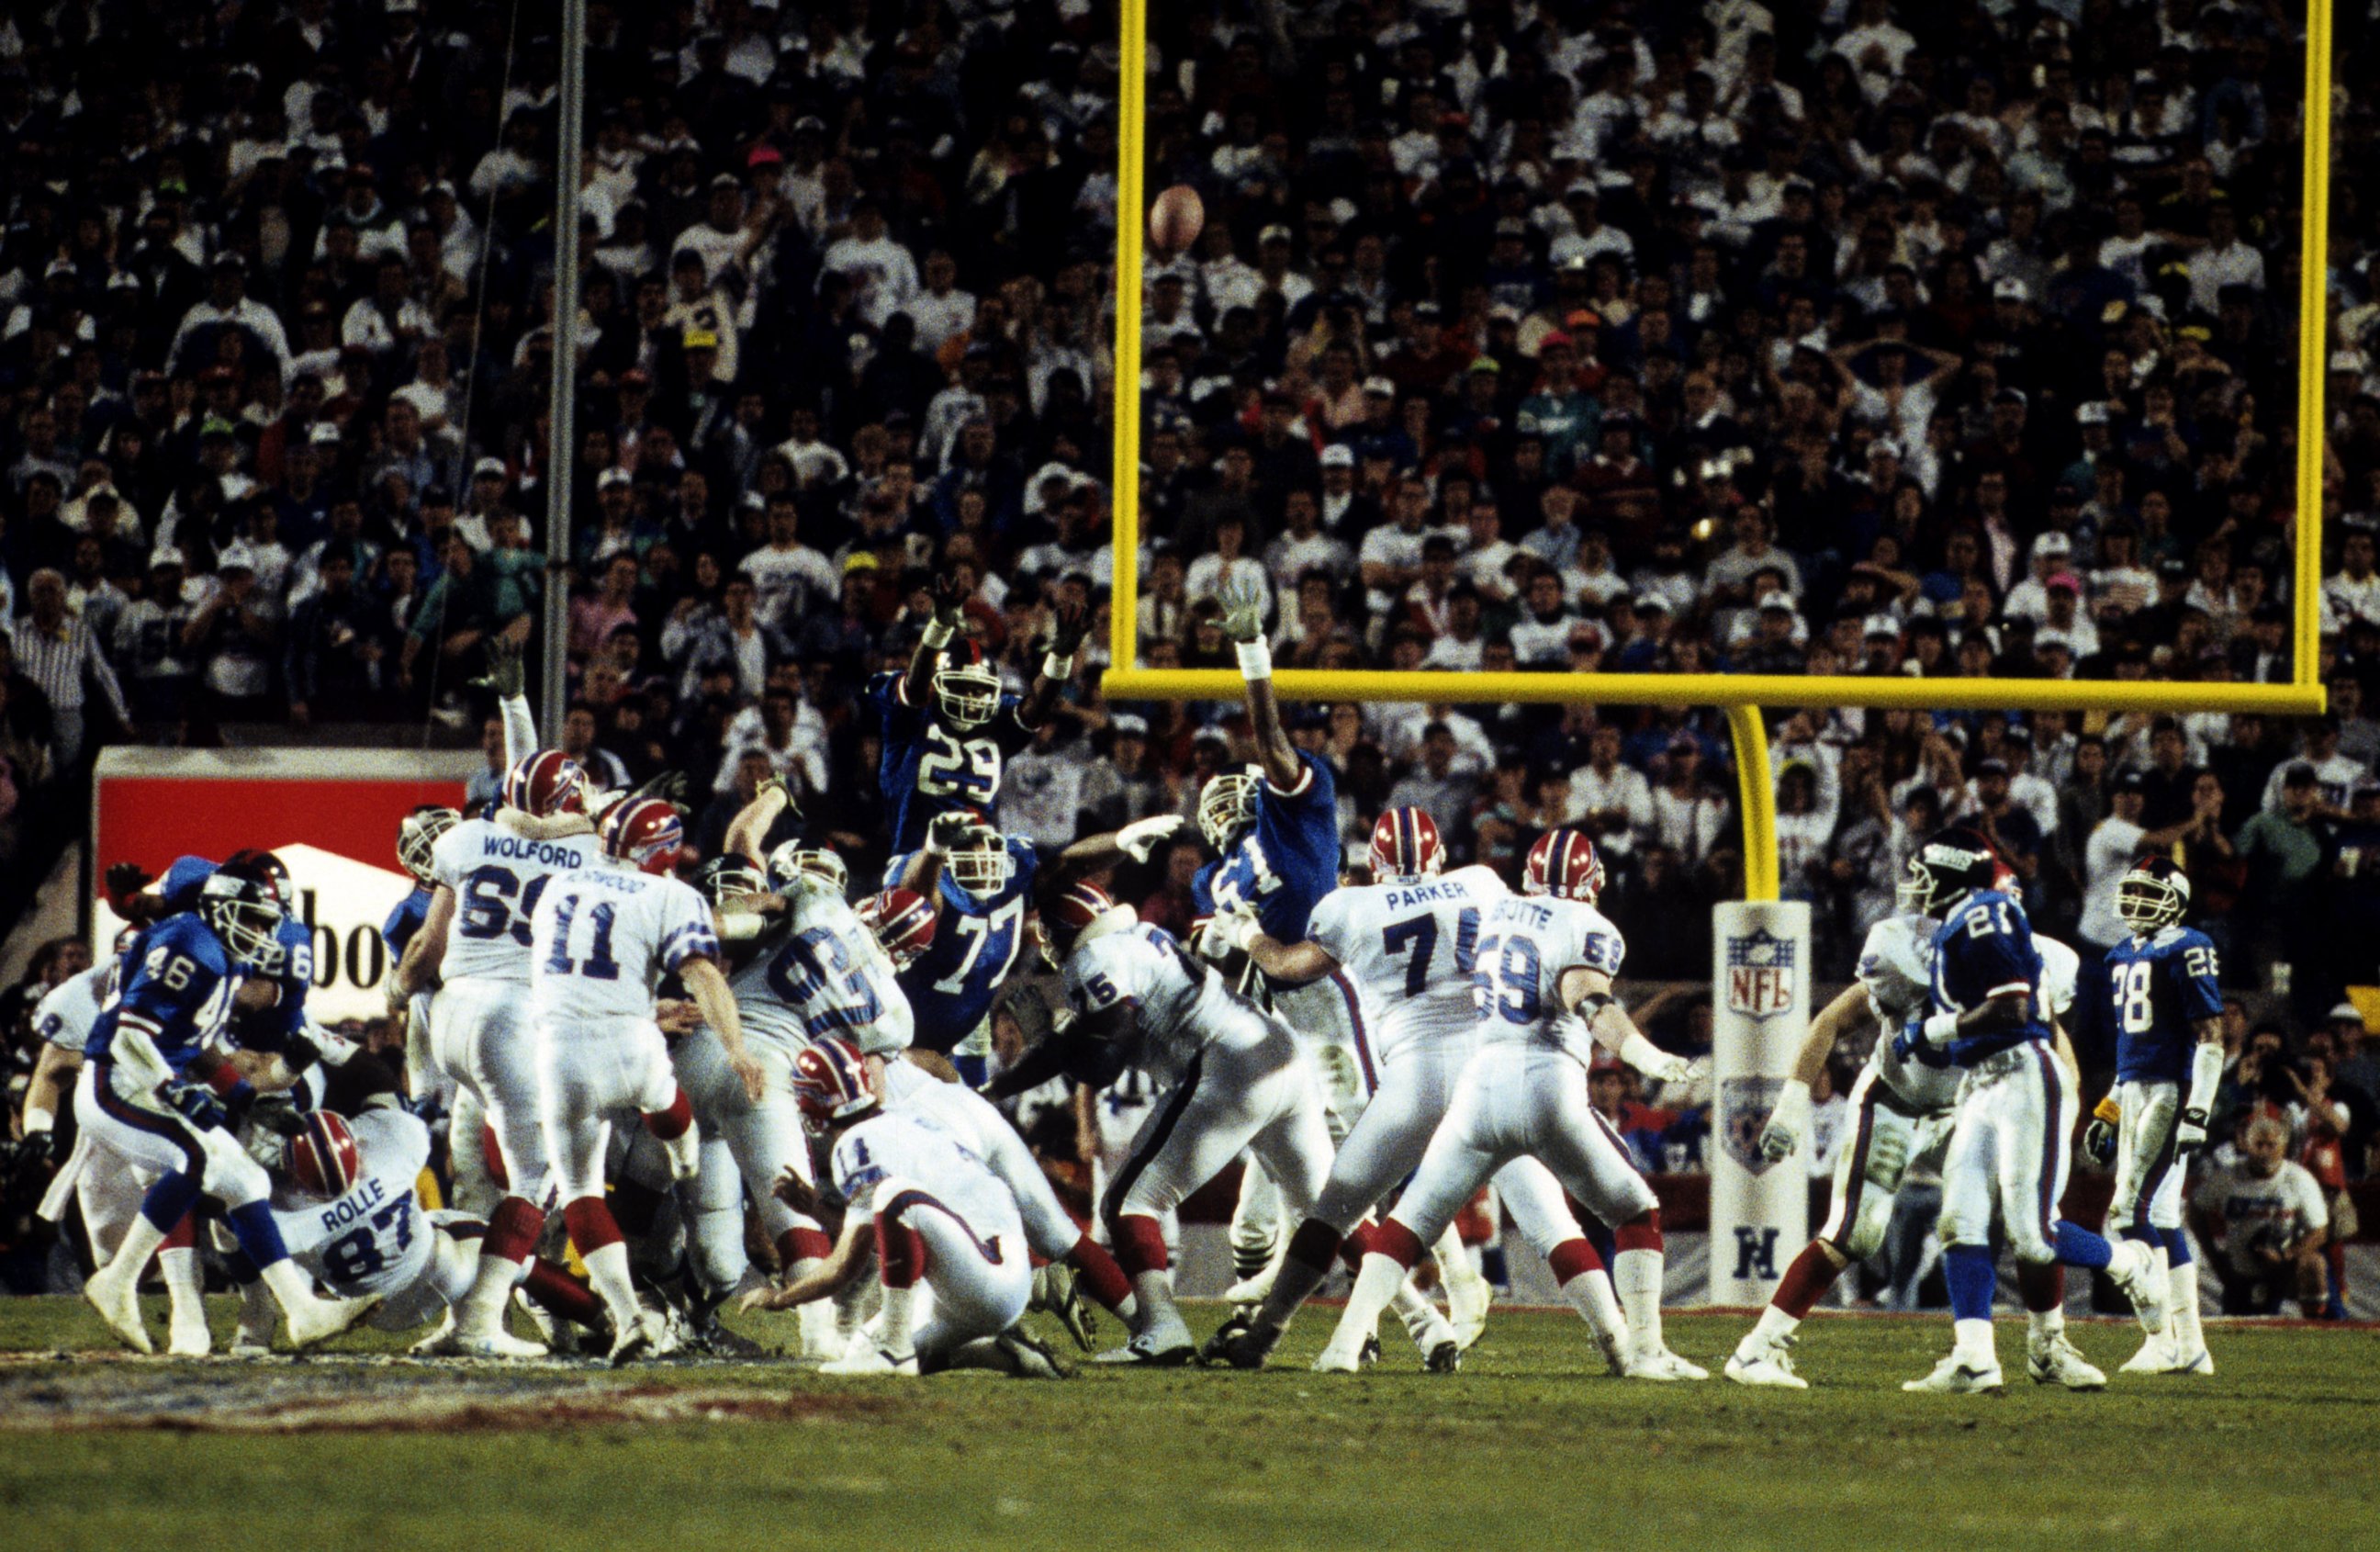 PHOTO: Buffalo Bills kicker Scott Norwood (11) misses his last-second game-winning field goal attempt wide right during Super Bowl XXV, a 20-19 loss to the New York Giants on Jan. 27, 1991, at Tampa Stadium in Tampa, Florida. 